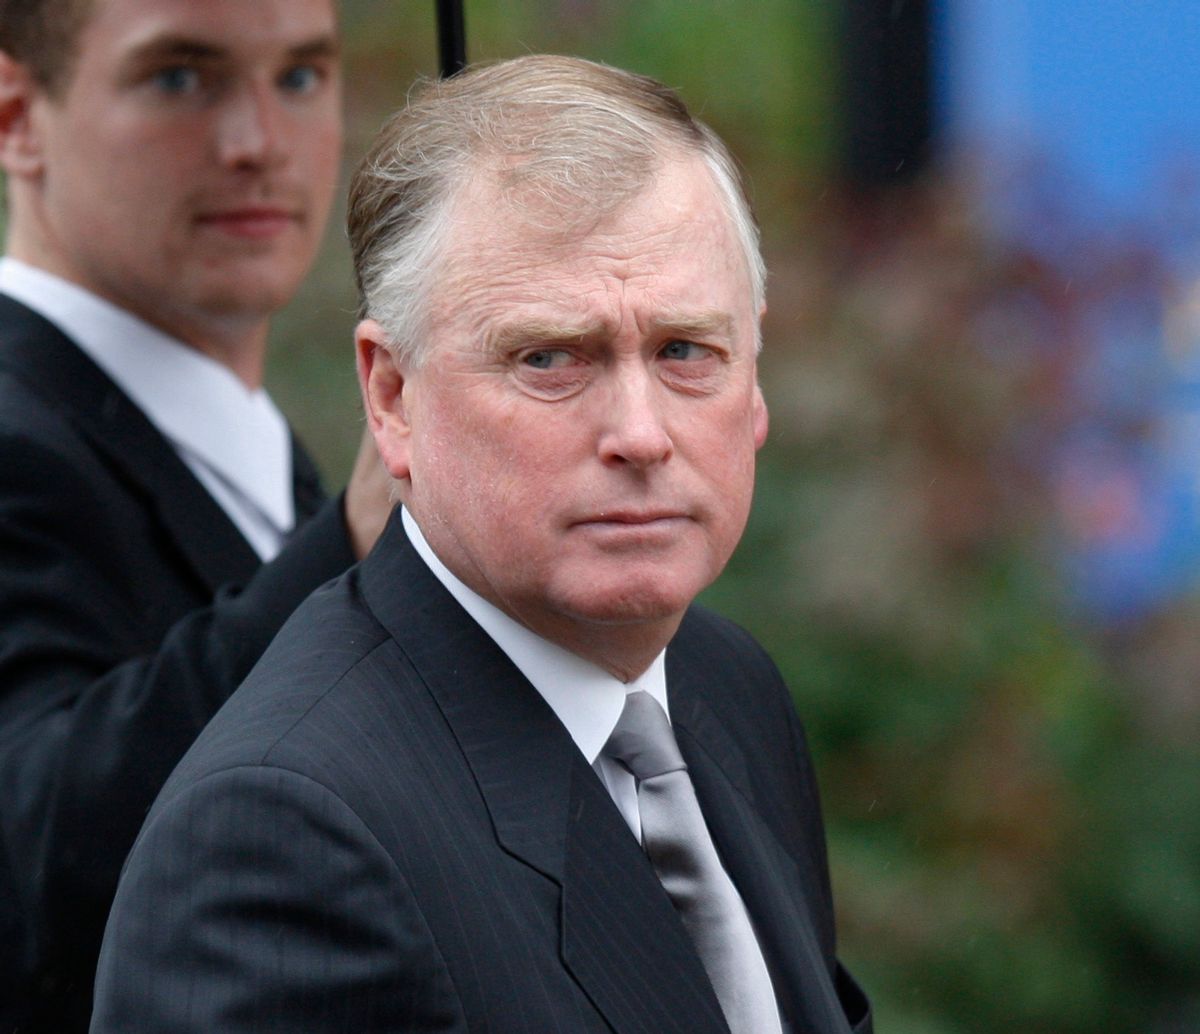 Former United States Vice President Dan Quayle arrives for funeral services of U.S Senator Edward Kennedy at the Basilica of Our Lady of Perpetual Help in Boston, Massachusetts August 29, 2009. Senator Kennedy died Tuesday after a battle with cancer.     REUTERS/Mike Segar (UNITED STATES POLITICS OBITUARY) (Â© Mike Segar / Reuters)